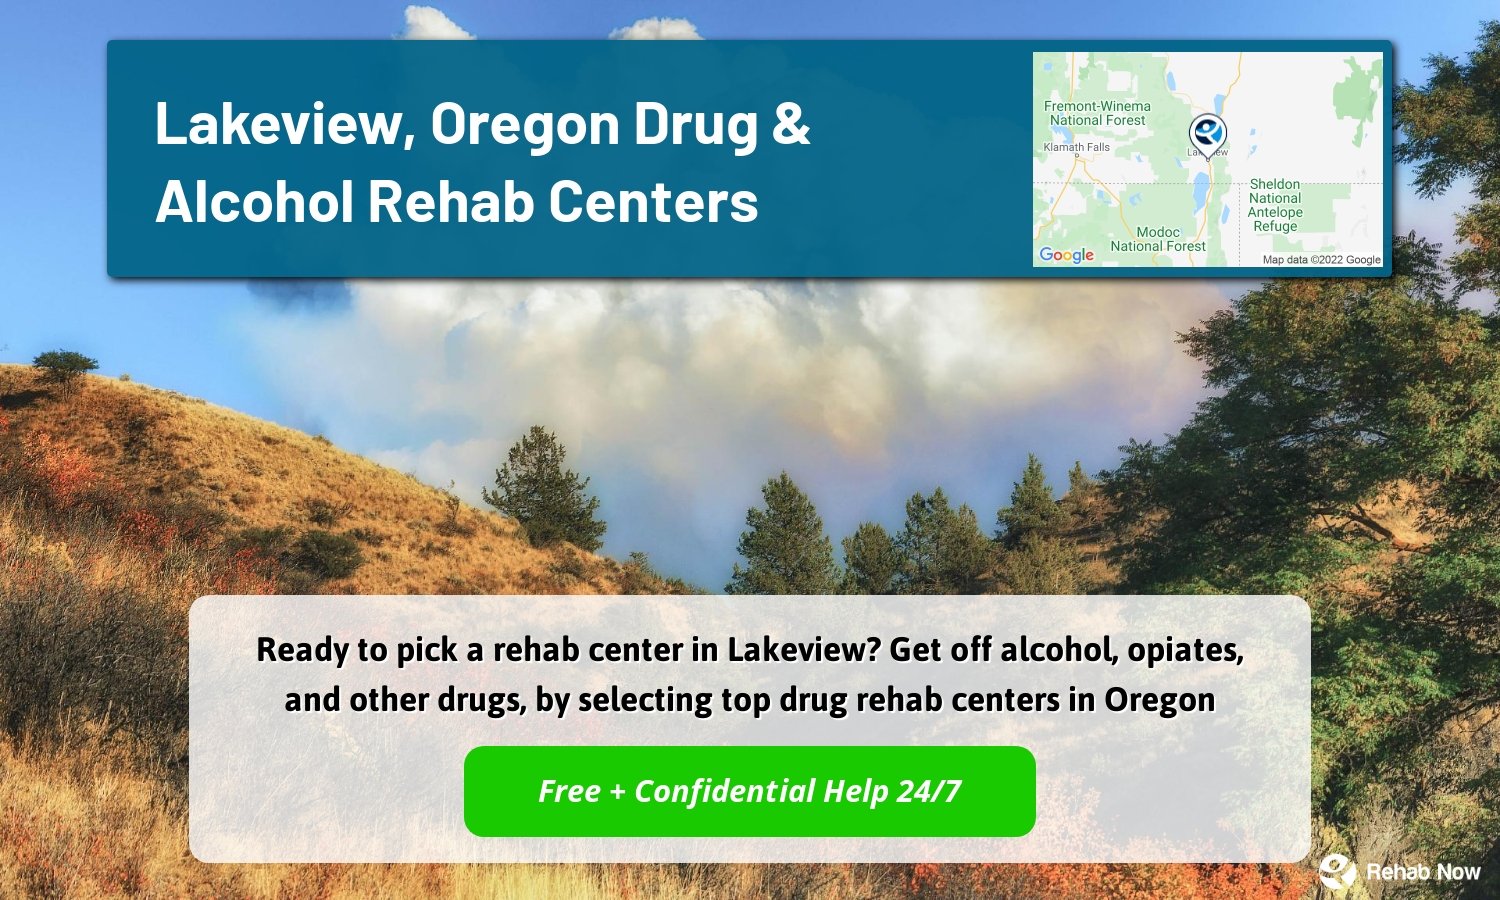 Ready to pick a rehab center in Lakeview? Get off alcohol, opiates, and other drugs, by selecting top drug rehab centers in Oregon